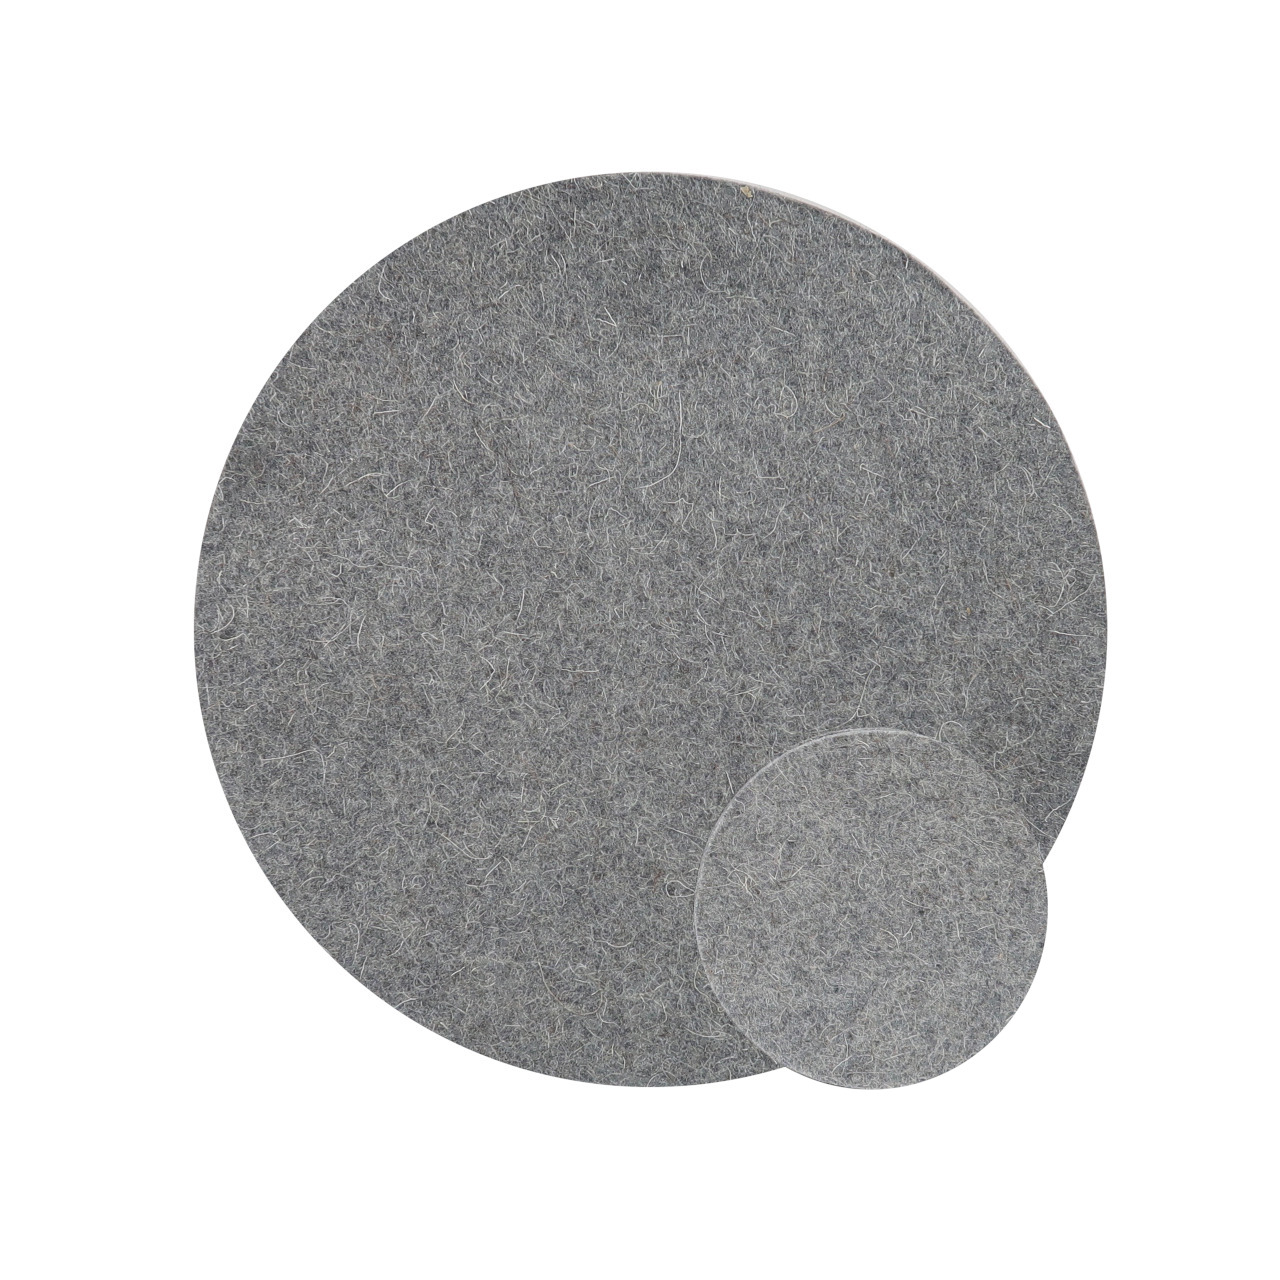 HAY Set of 4 Light Grey Felt Placemats and Coasters